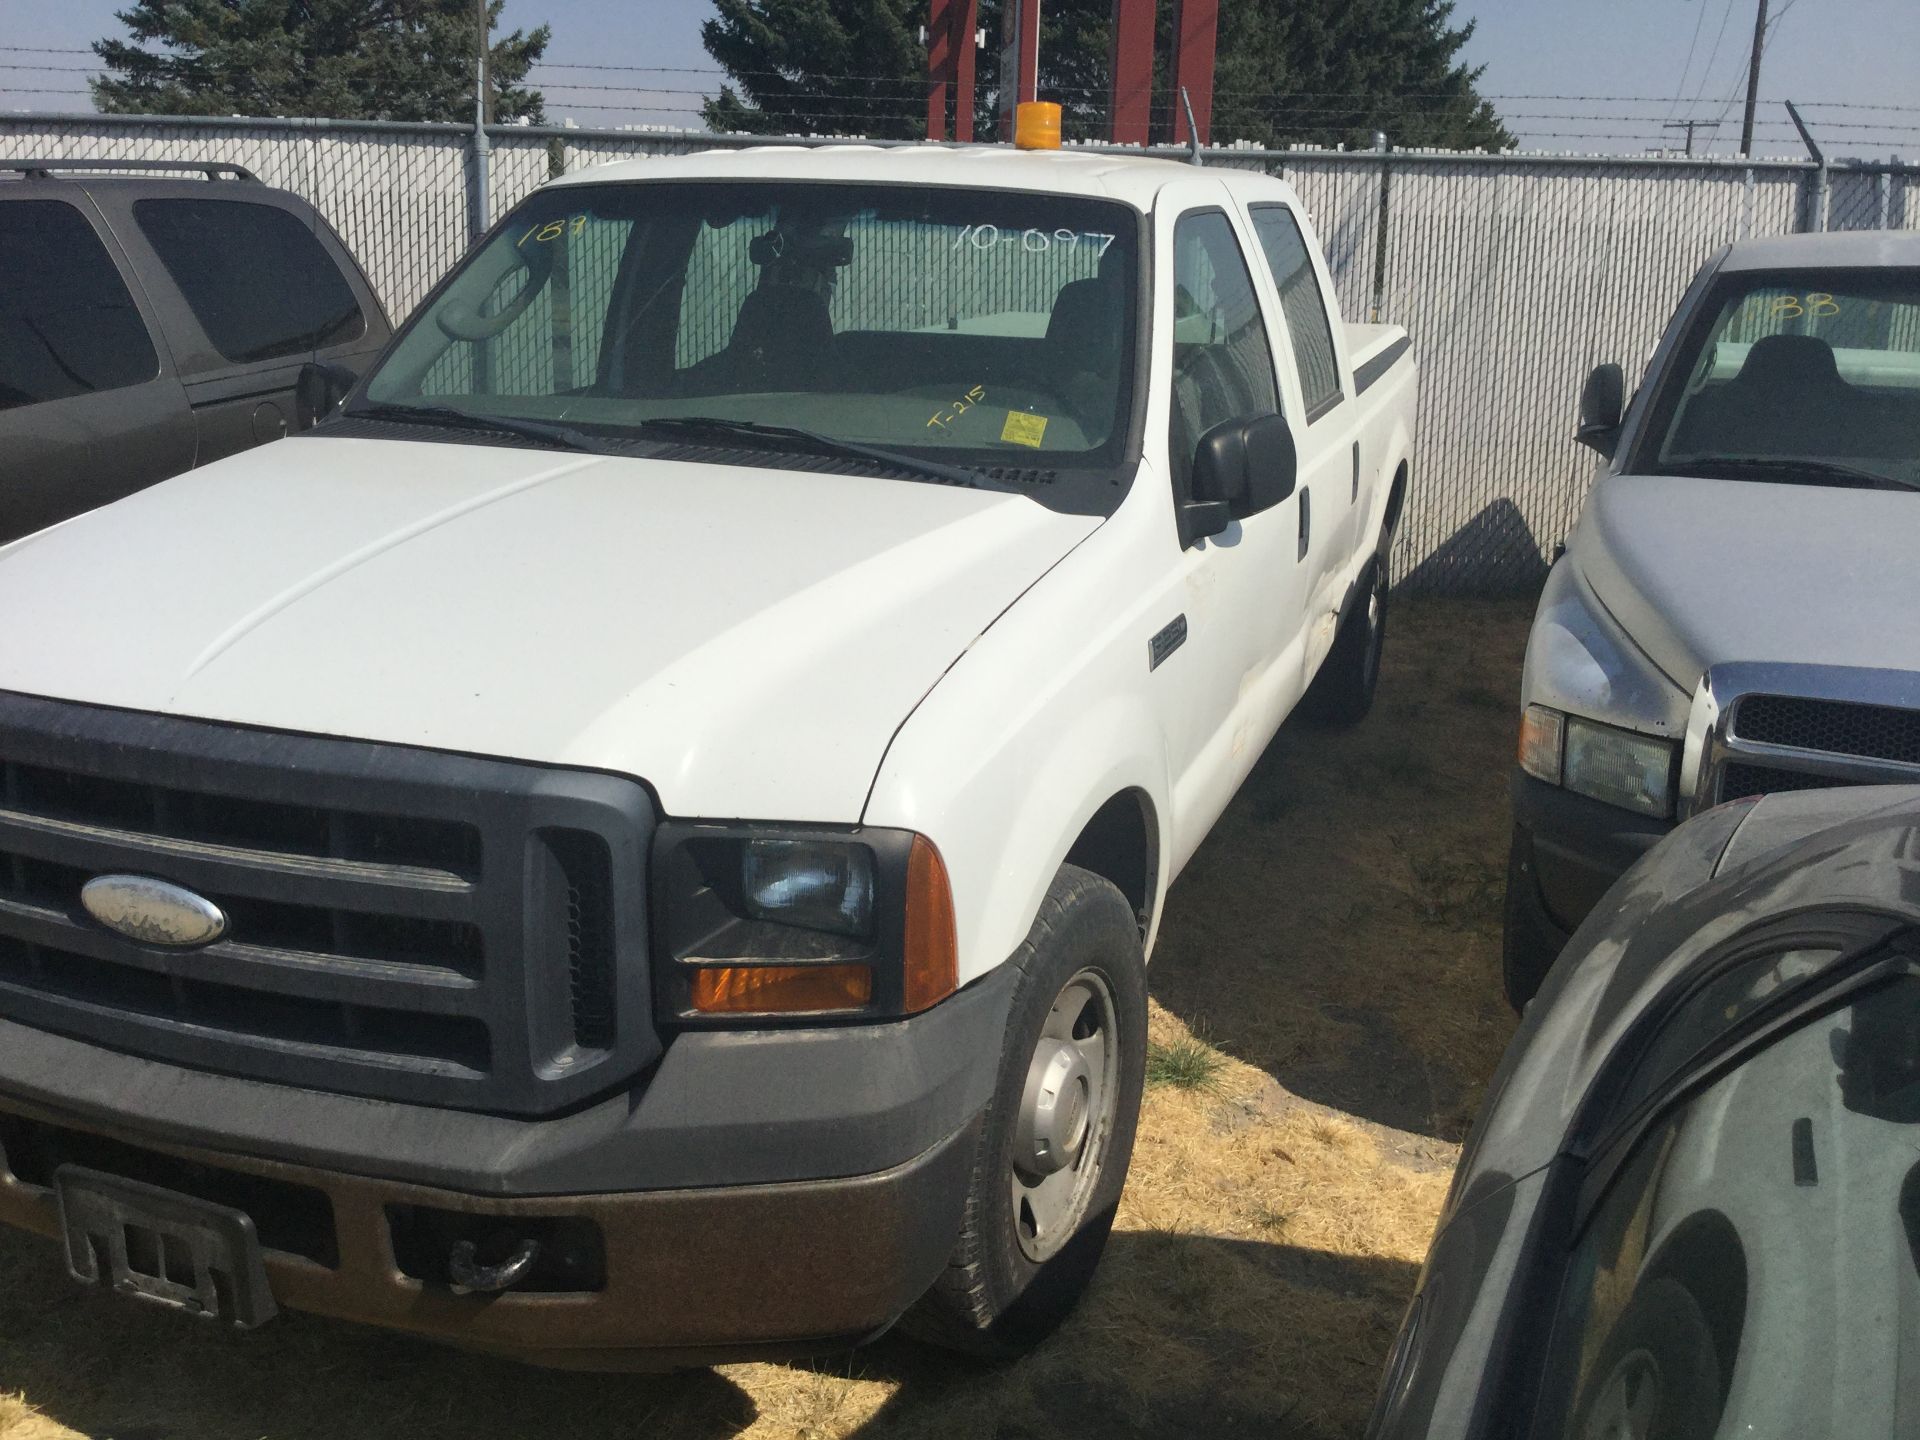 Year: 2006 Make: Ford Model: 3/4T Type: Pickup-Crew Cab Vin#: C68151 Mileage/Hours: 279640 5.4L,